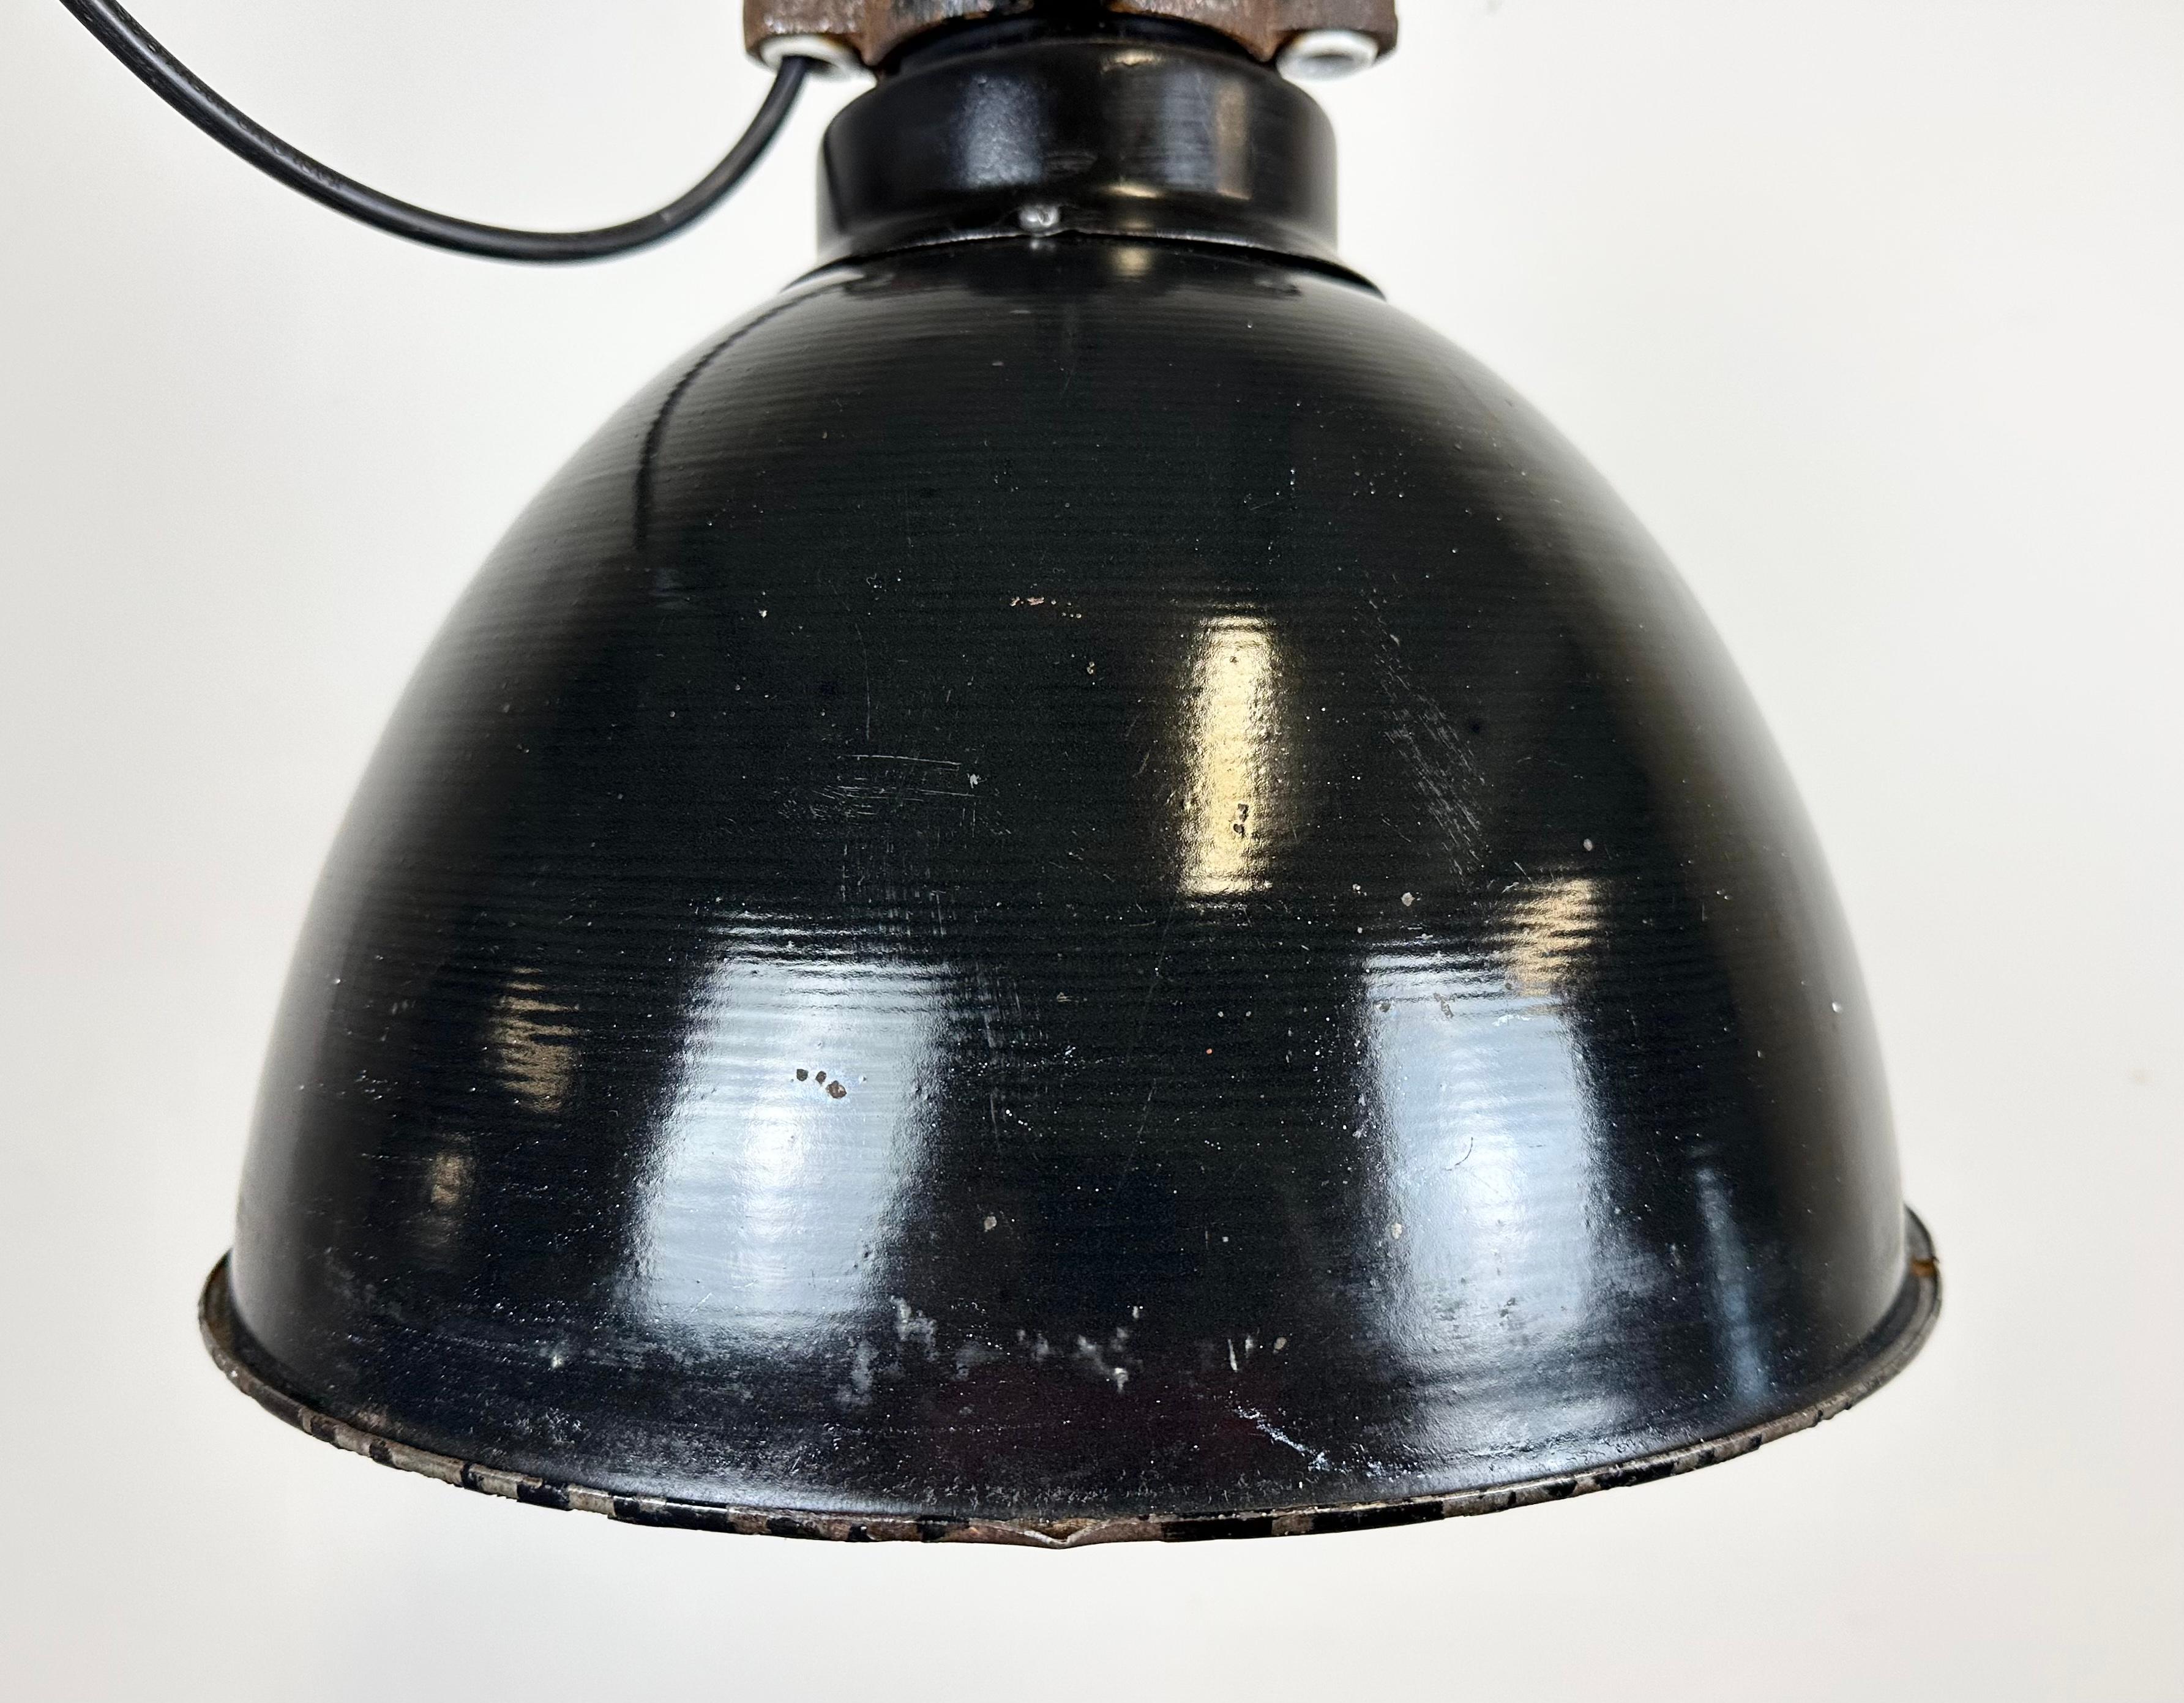 Industrial Bauhaus Black Enamel Pendant Lamp, 1930s In Good Condition For Sale In Kojetice, CZ